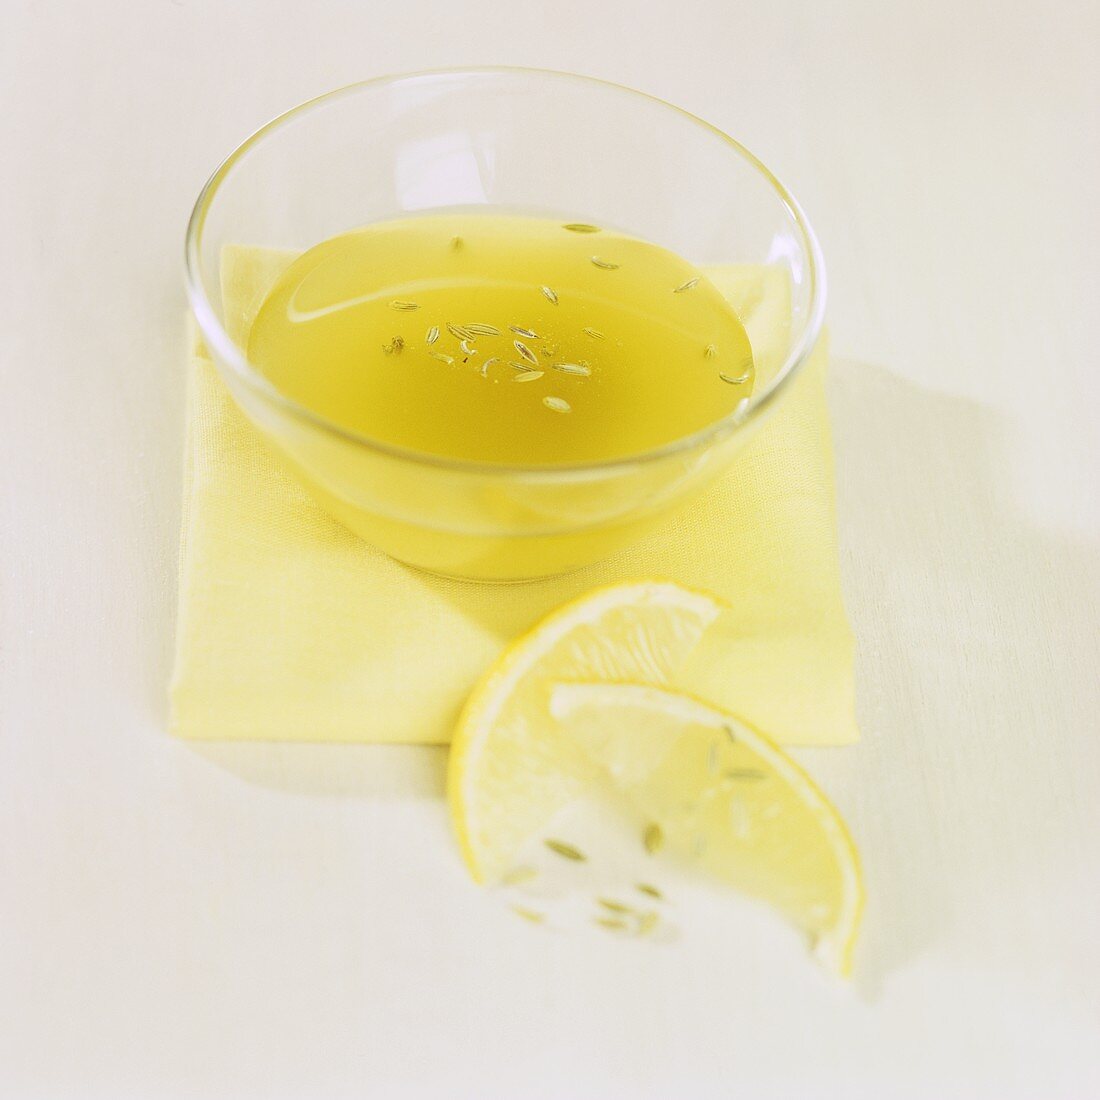 Lemon marinade with fennel seeds, for fish dishes